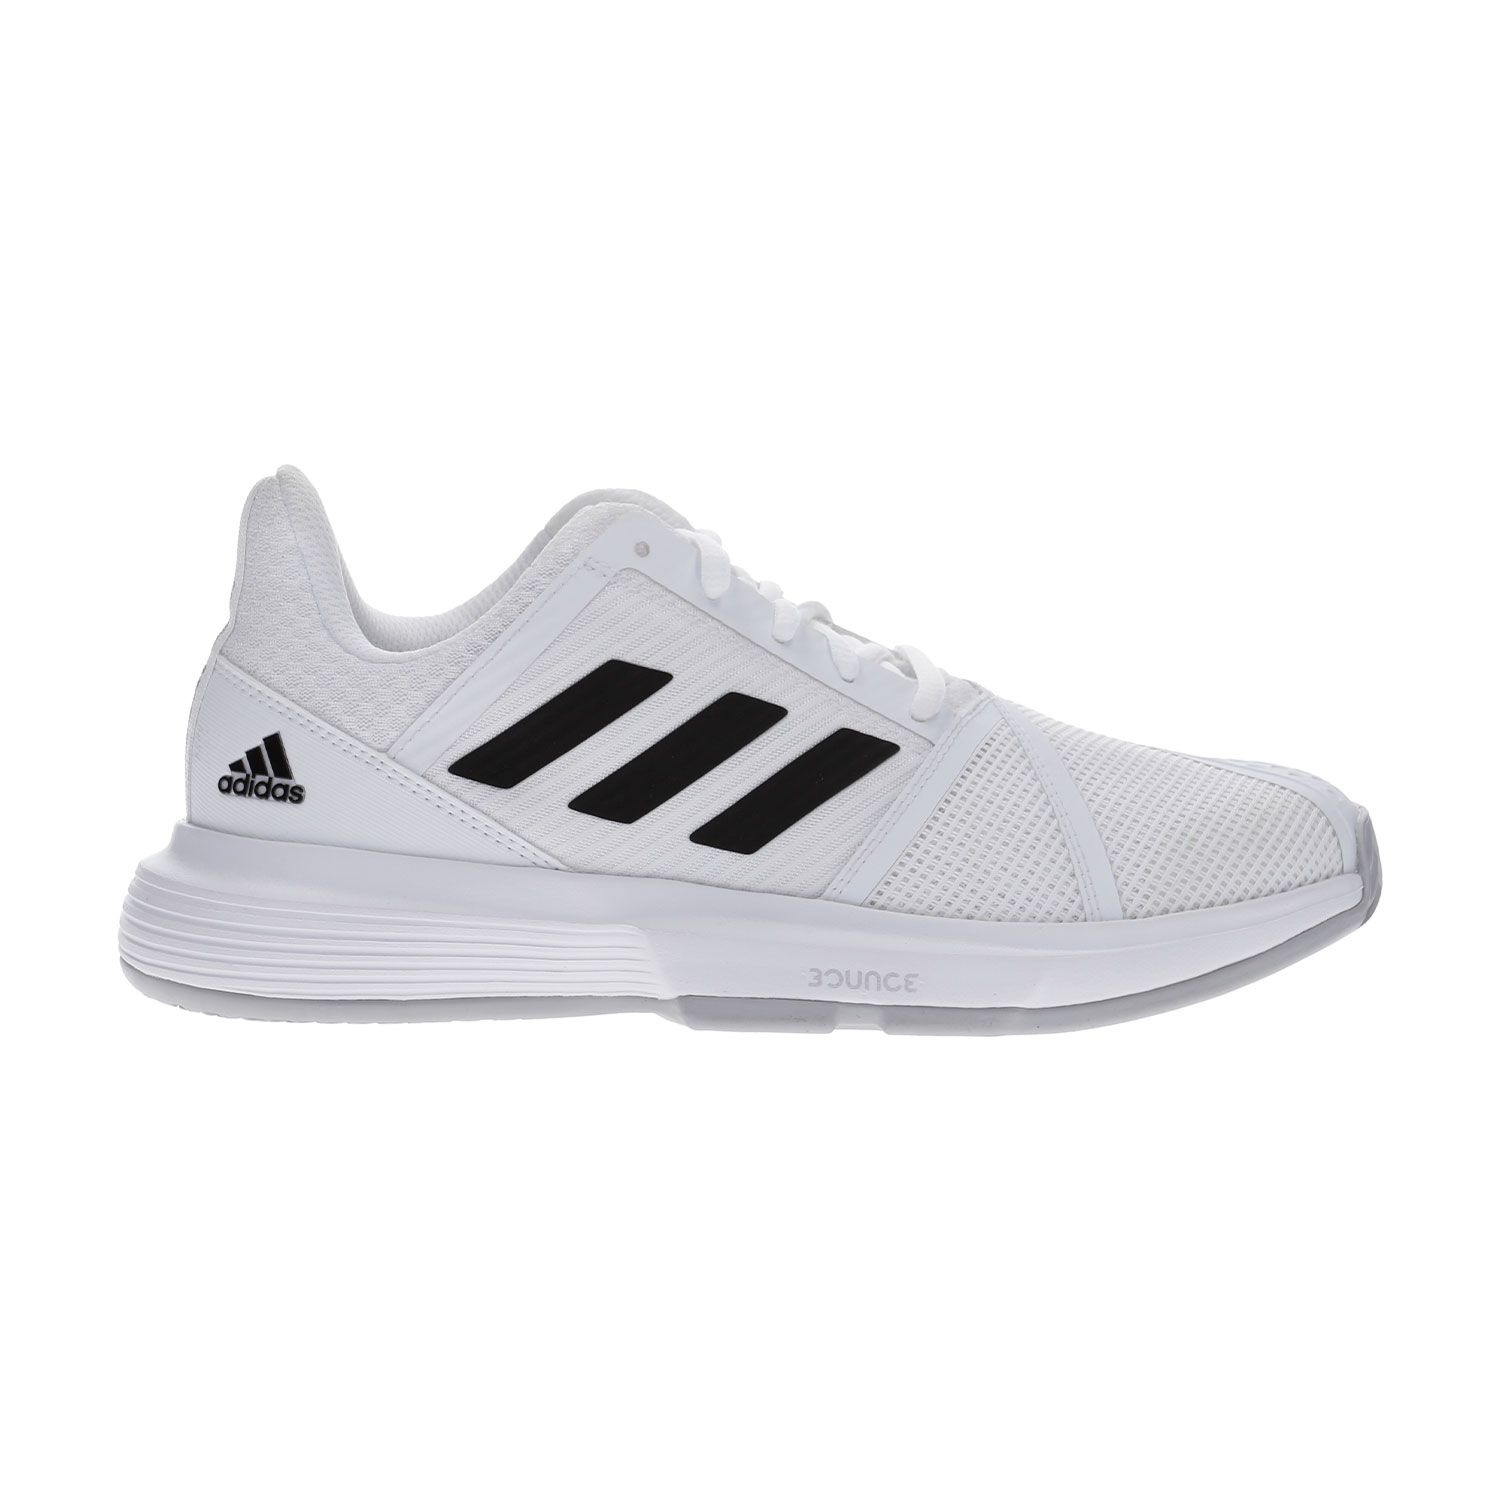 adidas CourtJam Bounce Women's Tennis Shoes - Ftwr White